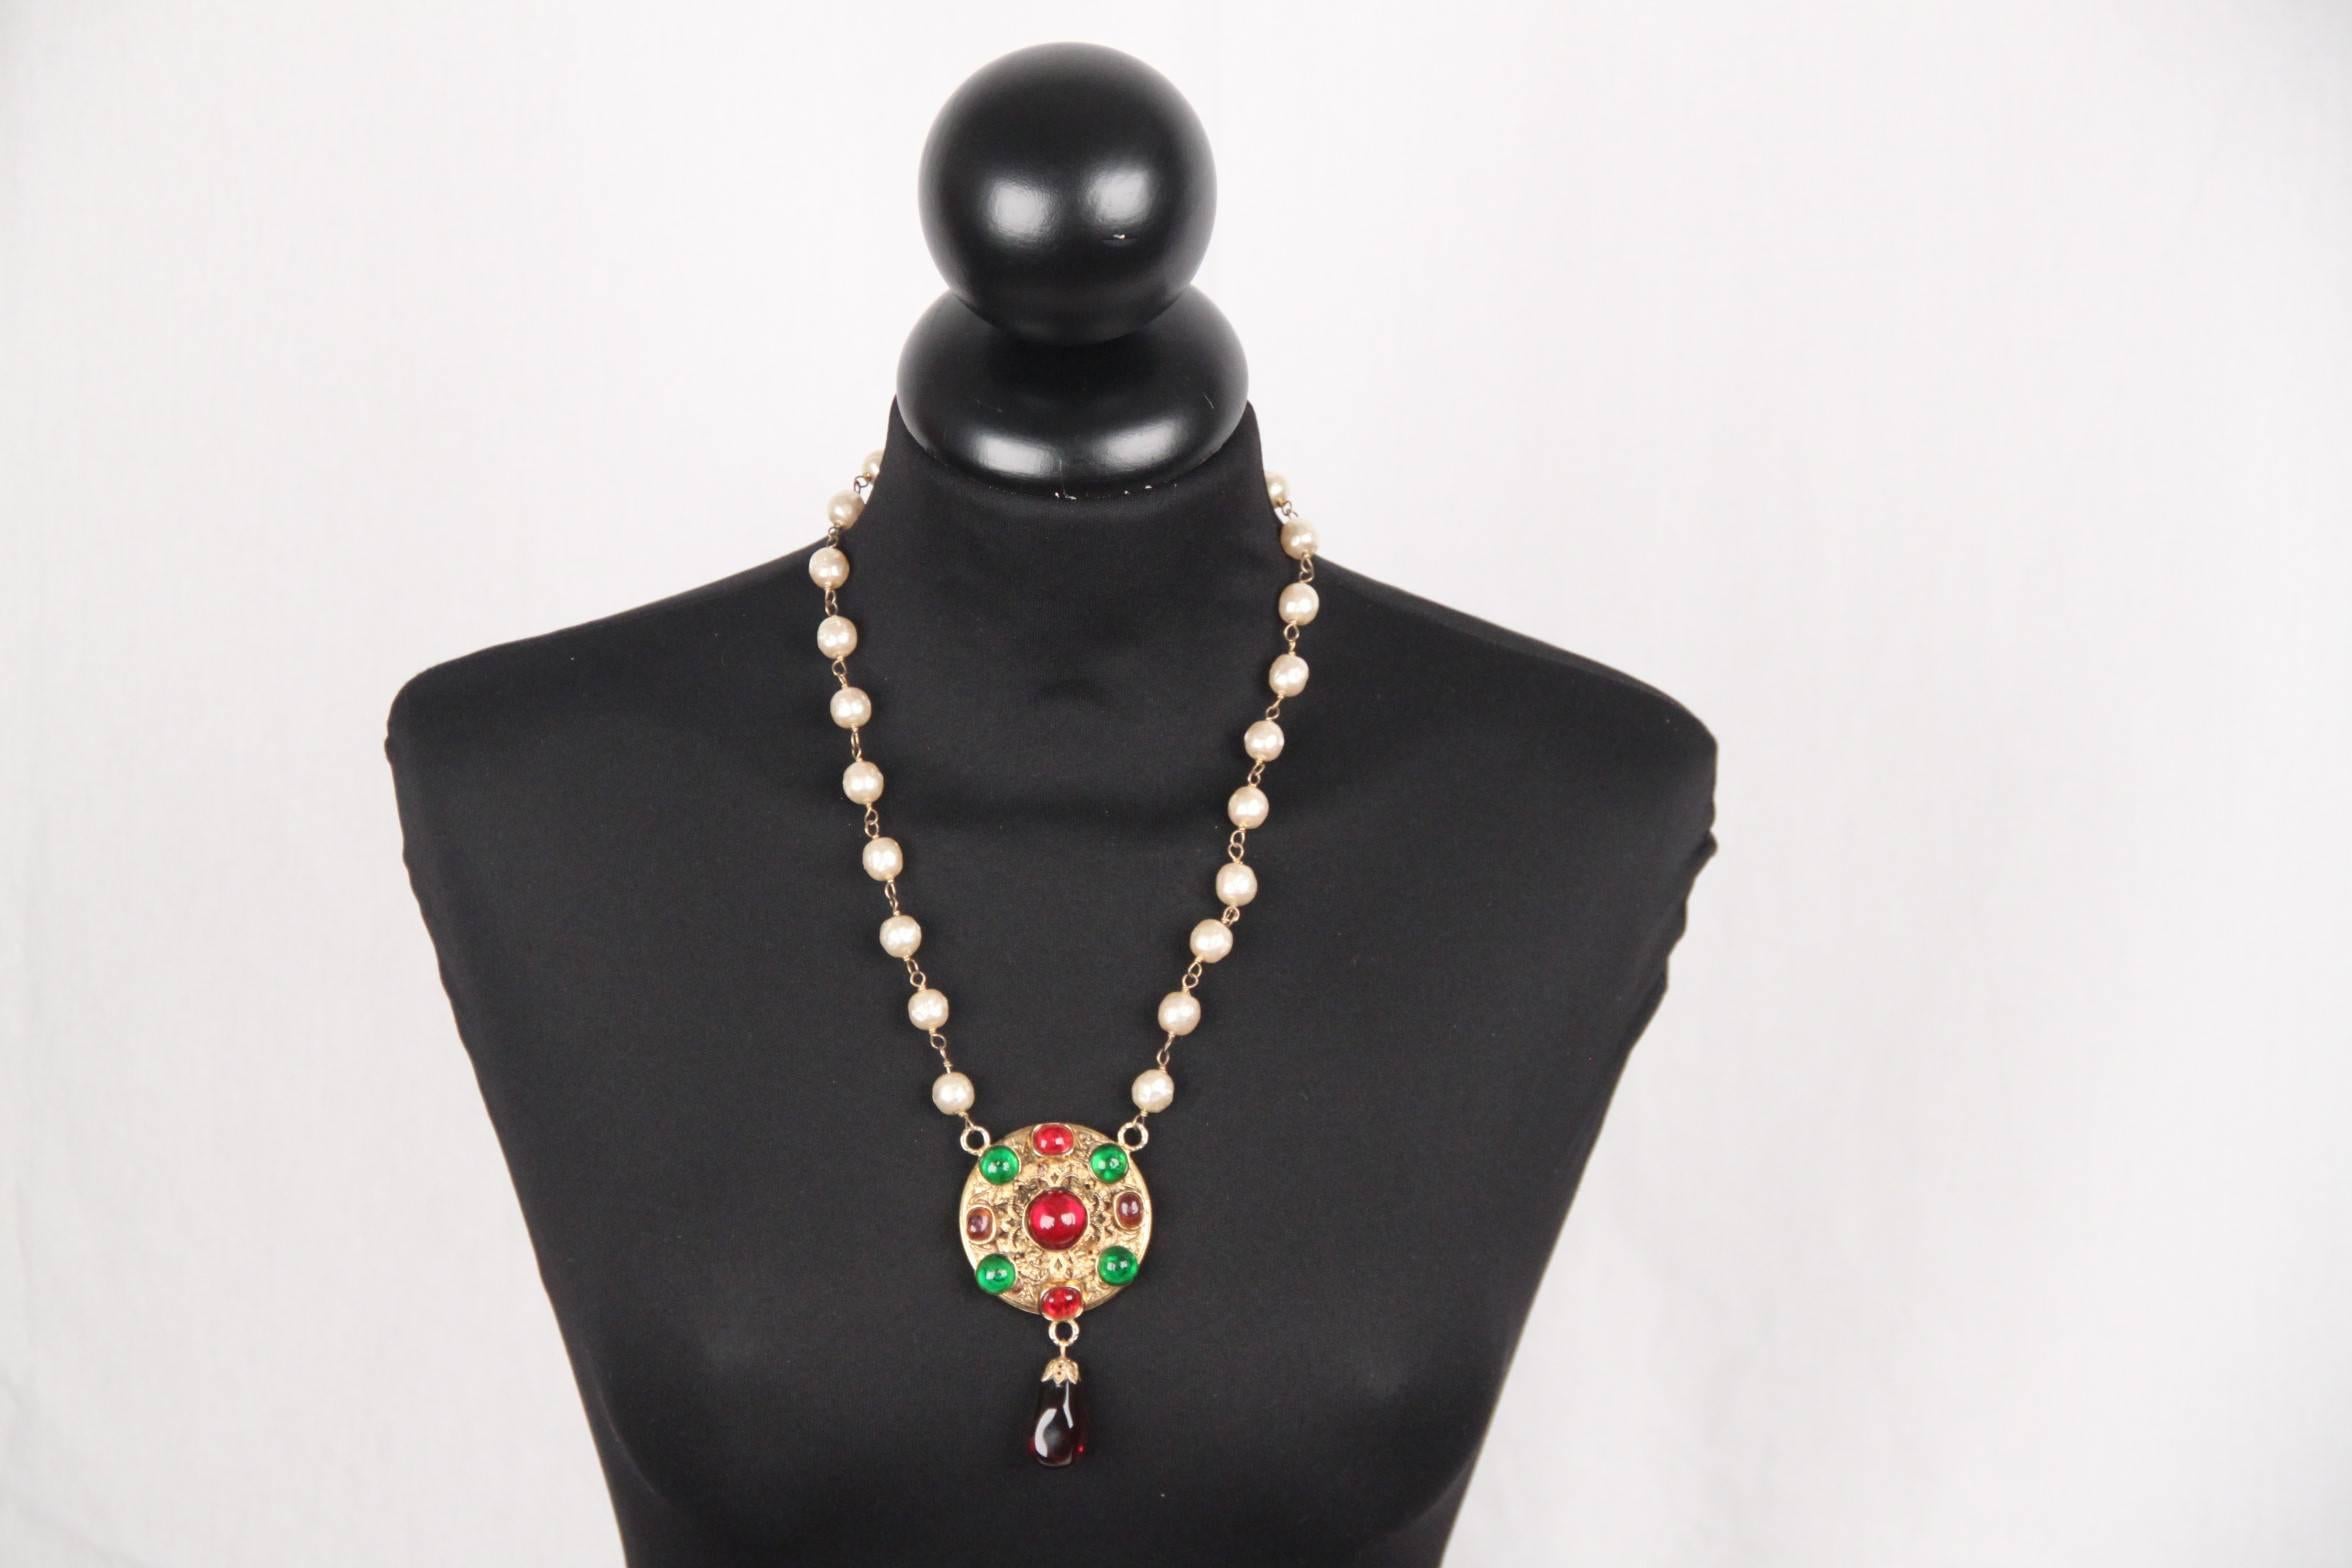 
- Chanel necklace from the 1985
- Glass pearl beads necklace
- Round medallion in the center in gold metal decorated with Gripoix vitreous paste cabochons in red, green and mauve colors
- 1 dangling tear drop pendant  at the bottom of the medallion